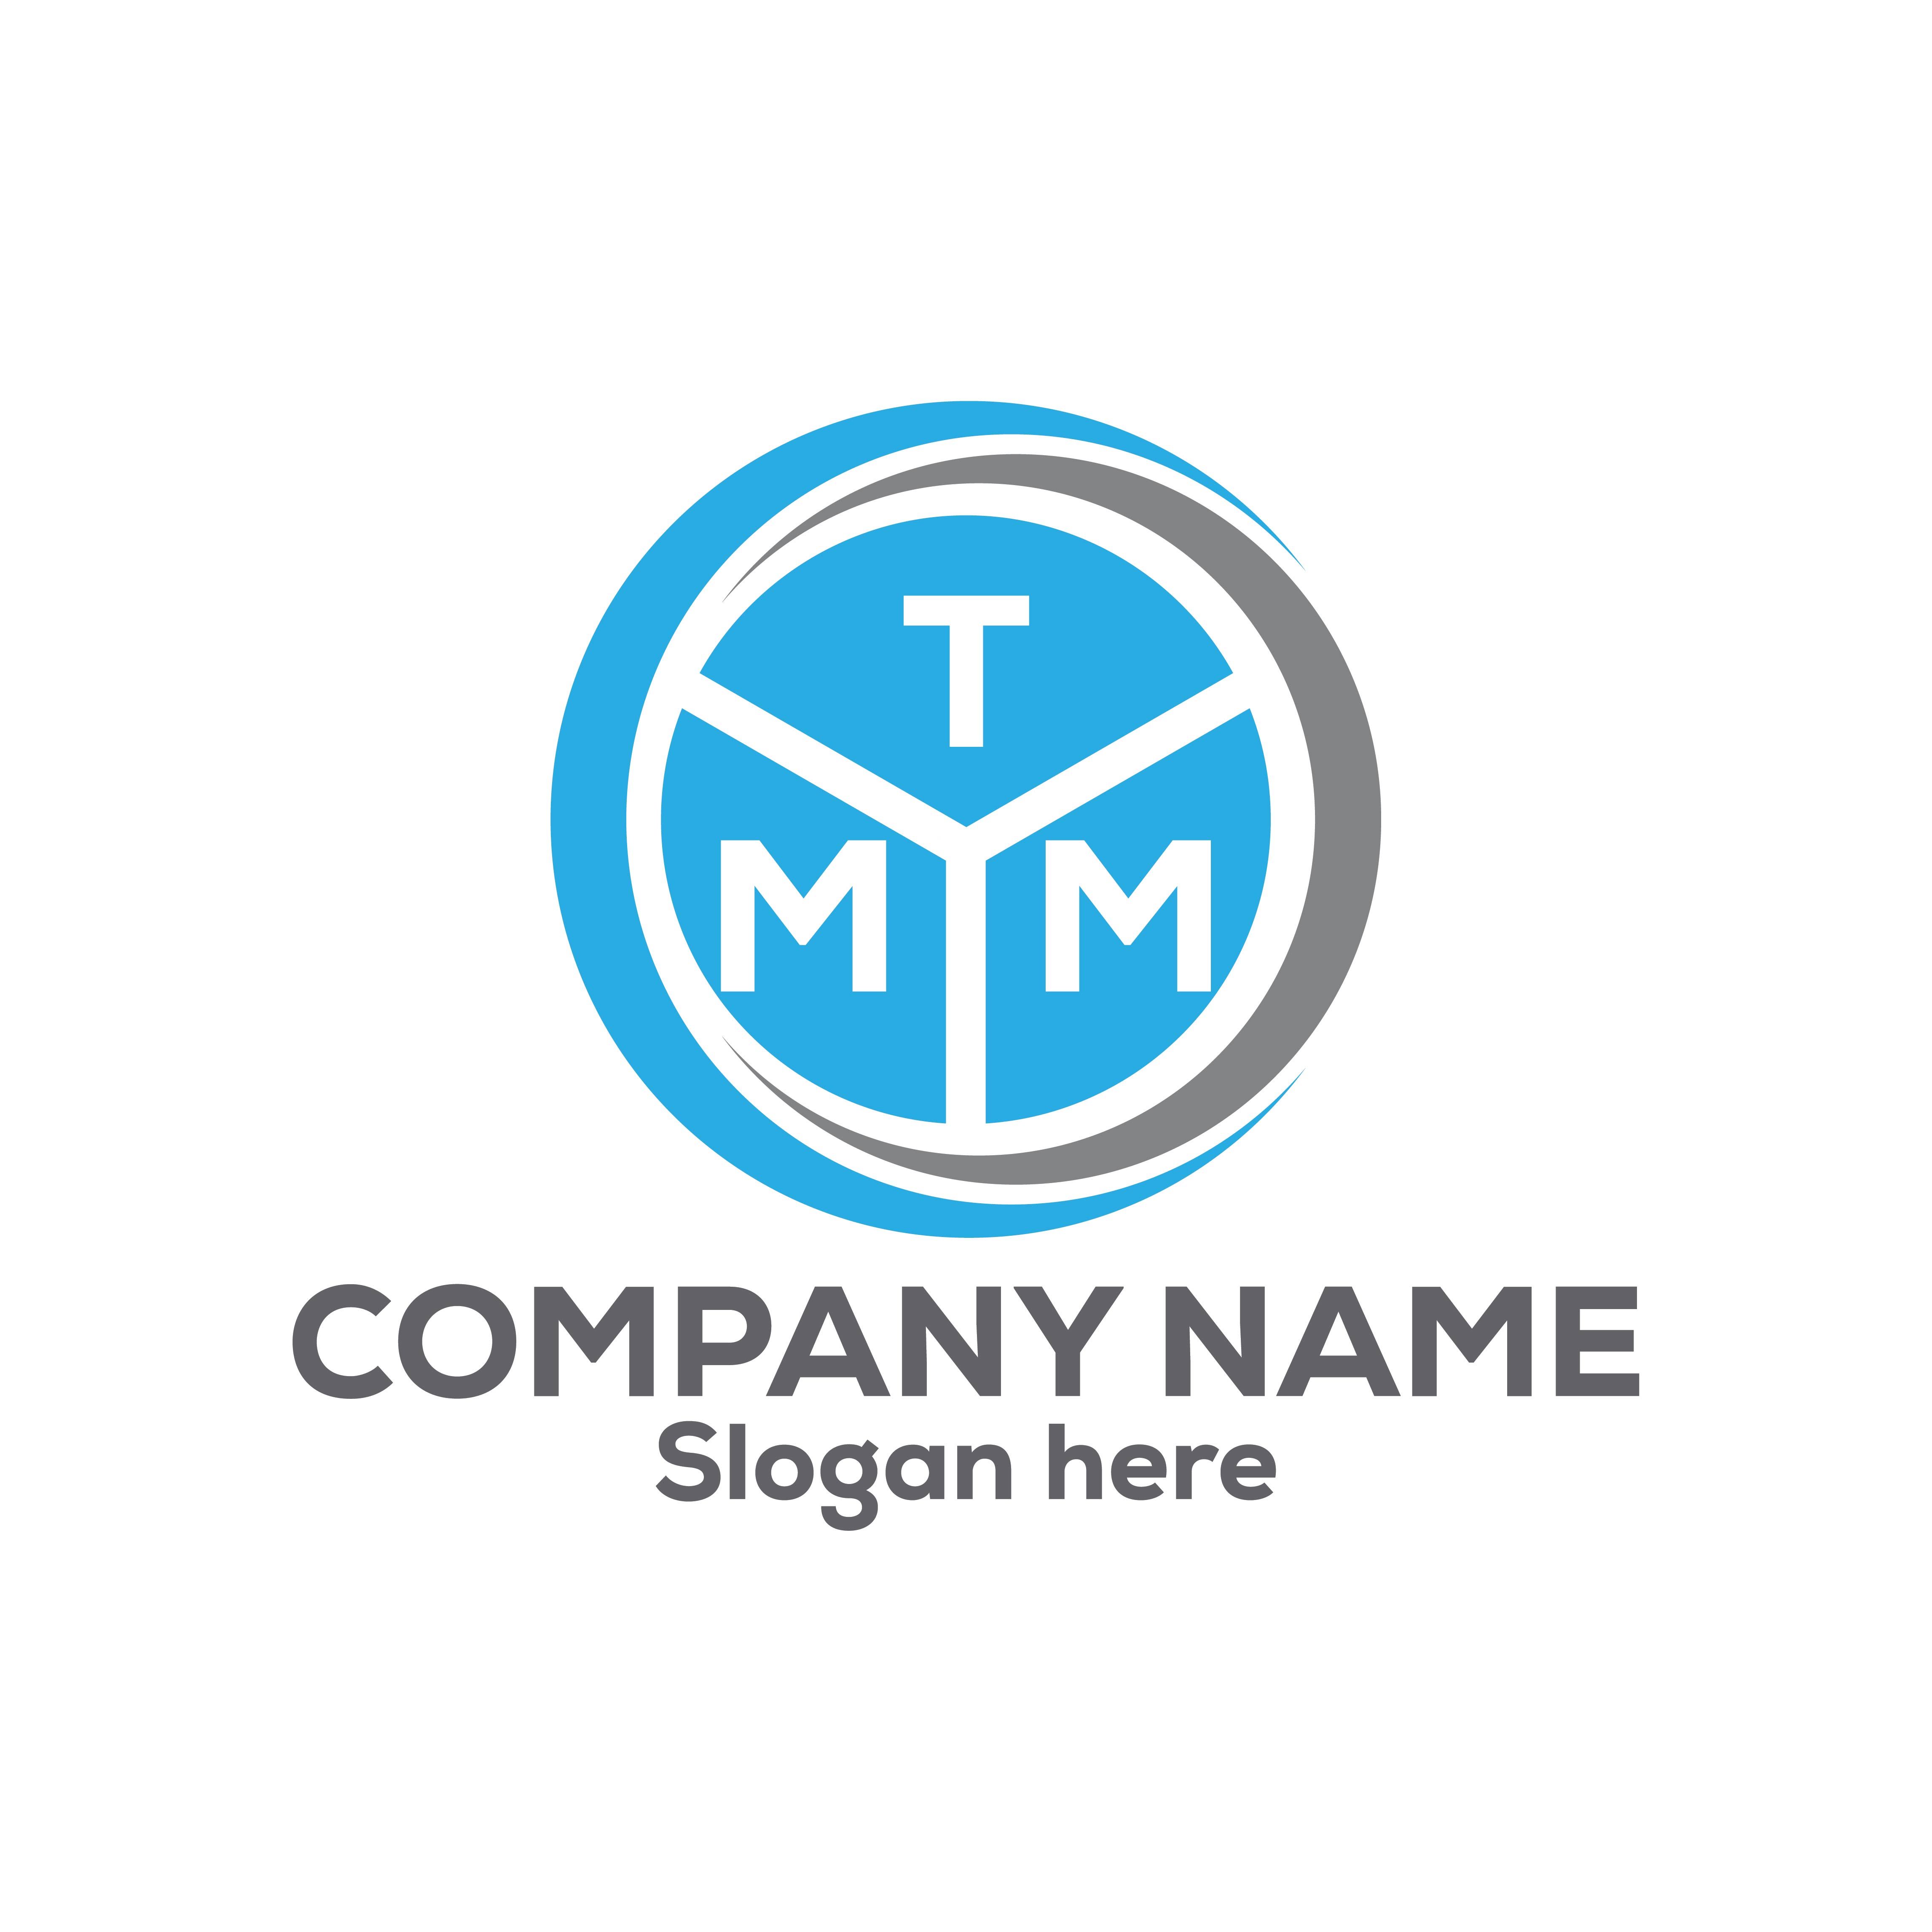 Letter TMM Logo or Icon Design Vector Image Template cover image.